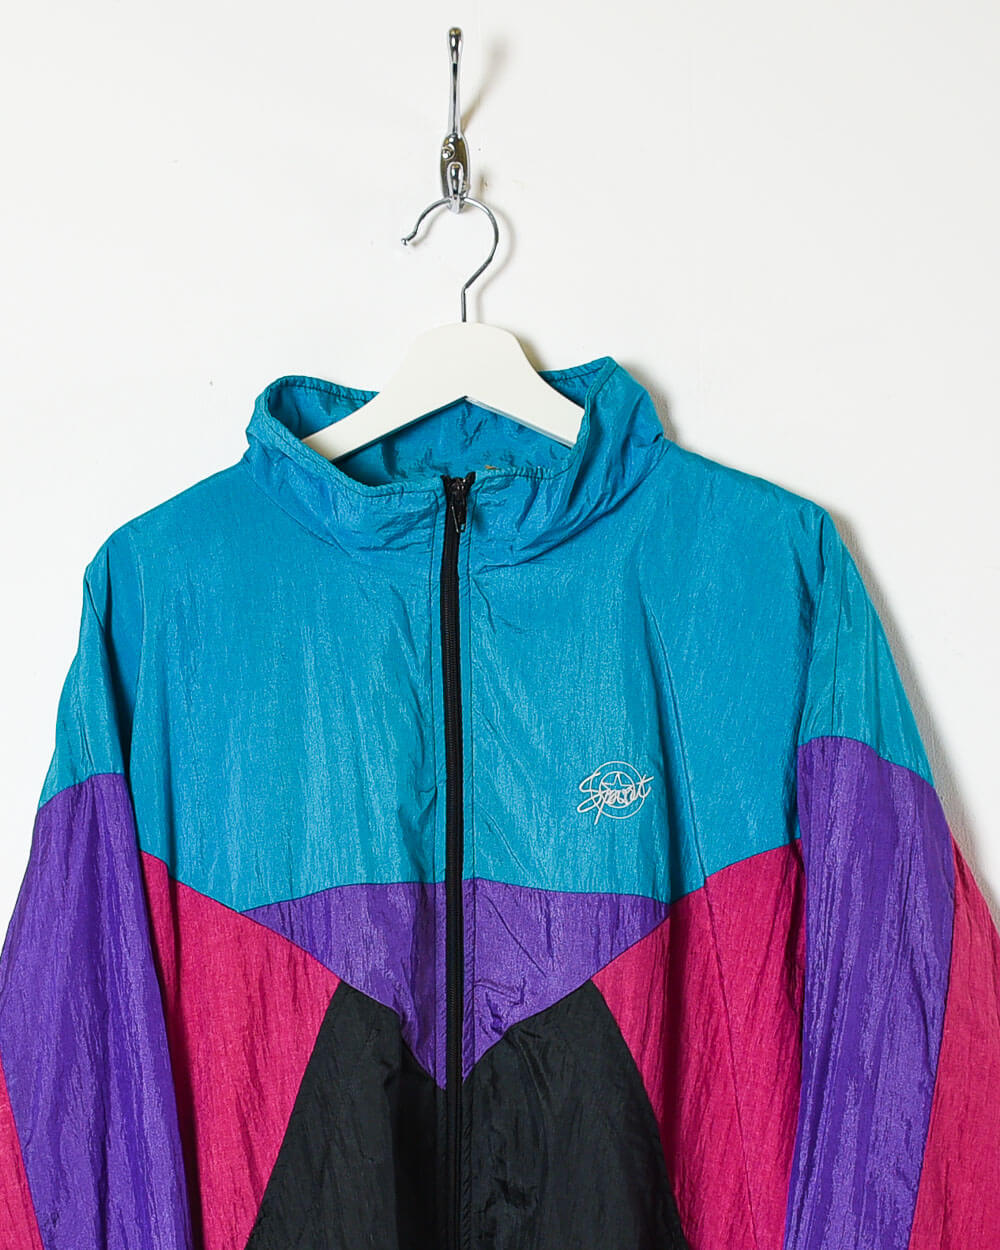 1990 Vintage Adidas Shell Jacket in really good condition | Vinted